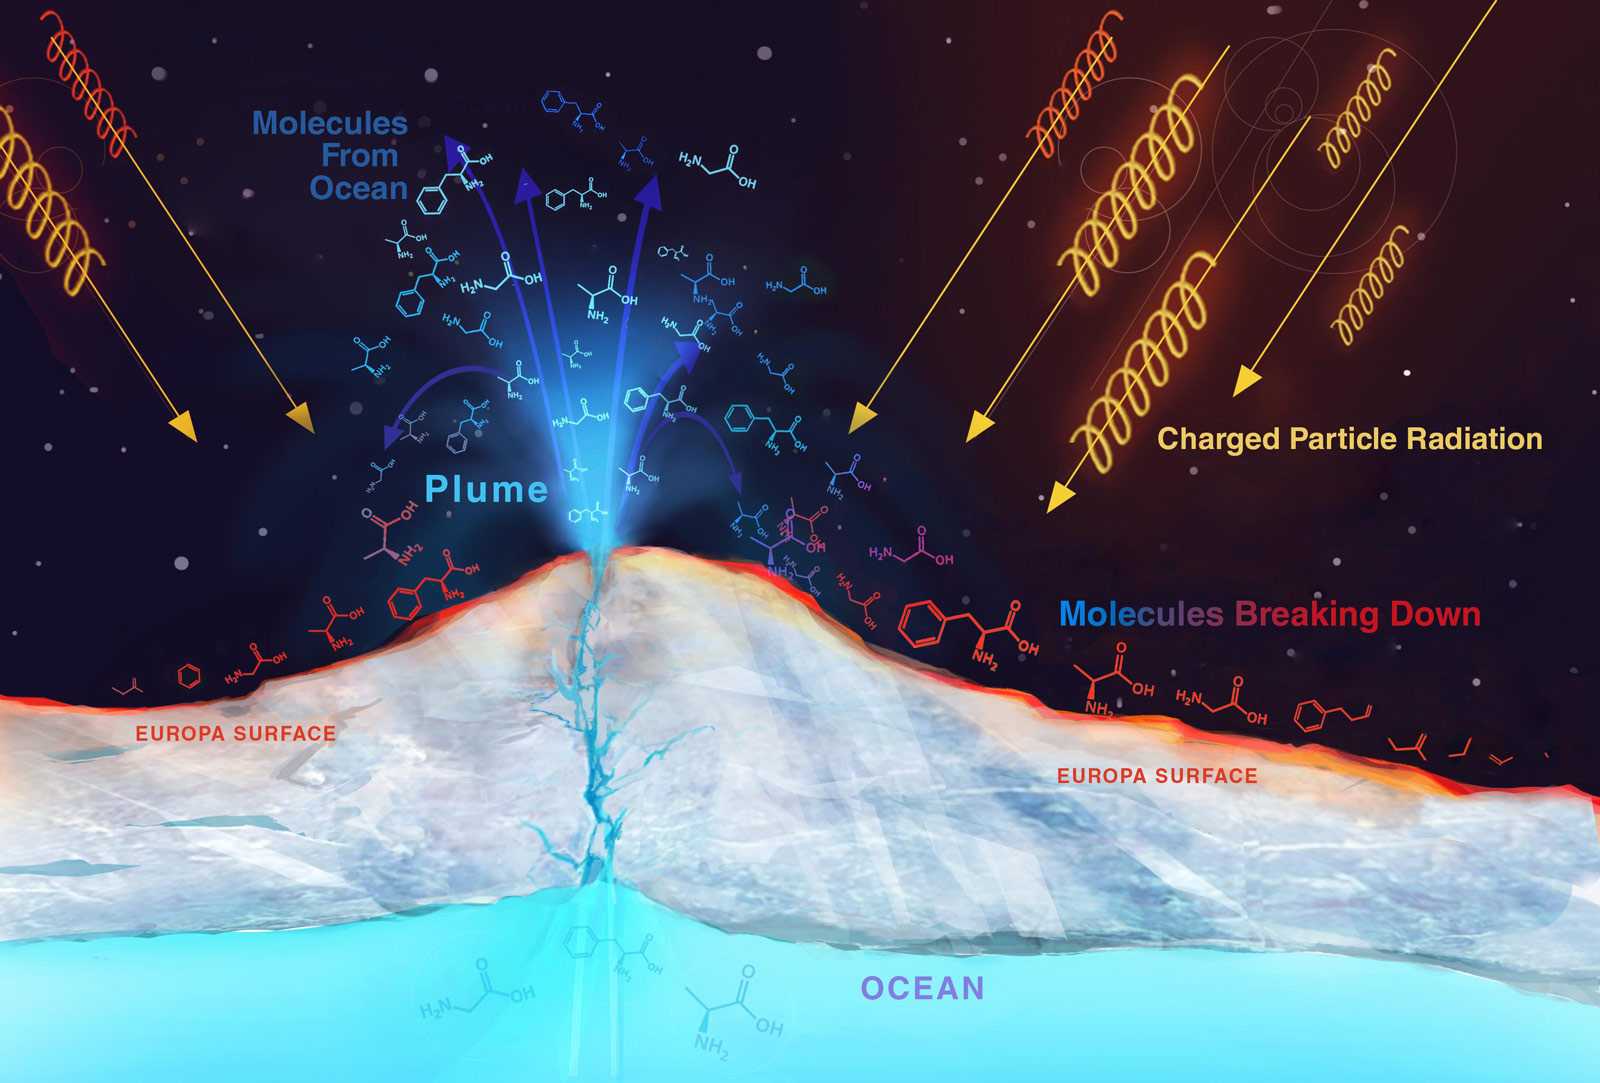 Graphic showing radiation effects on Europa's icy surface.